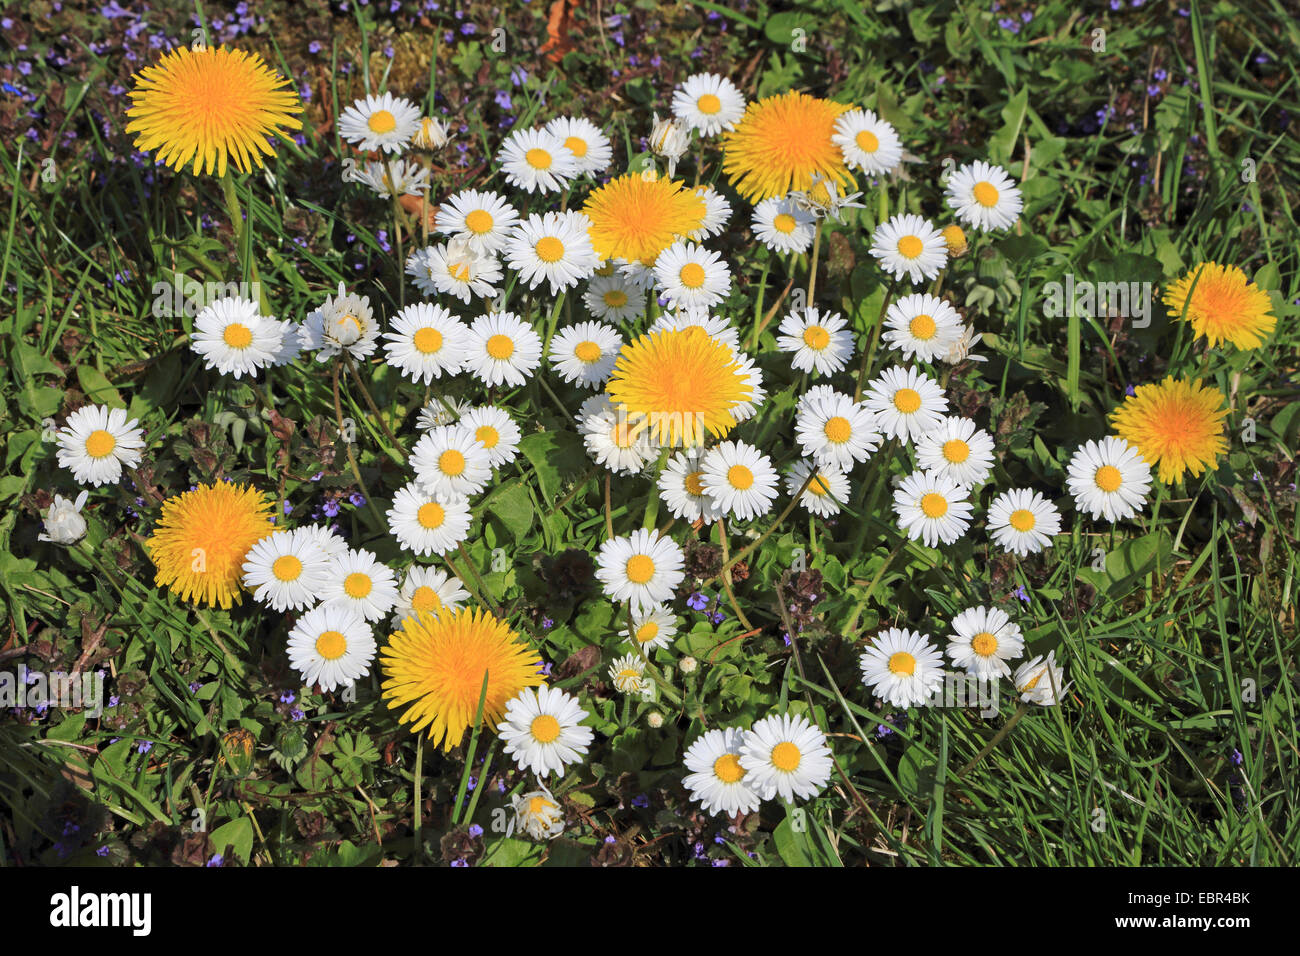 common daisy, lawn daisy, English daisy (Bellis perennis), lawn daisies with dandelions and ground ivies, Germany Stock Photo